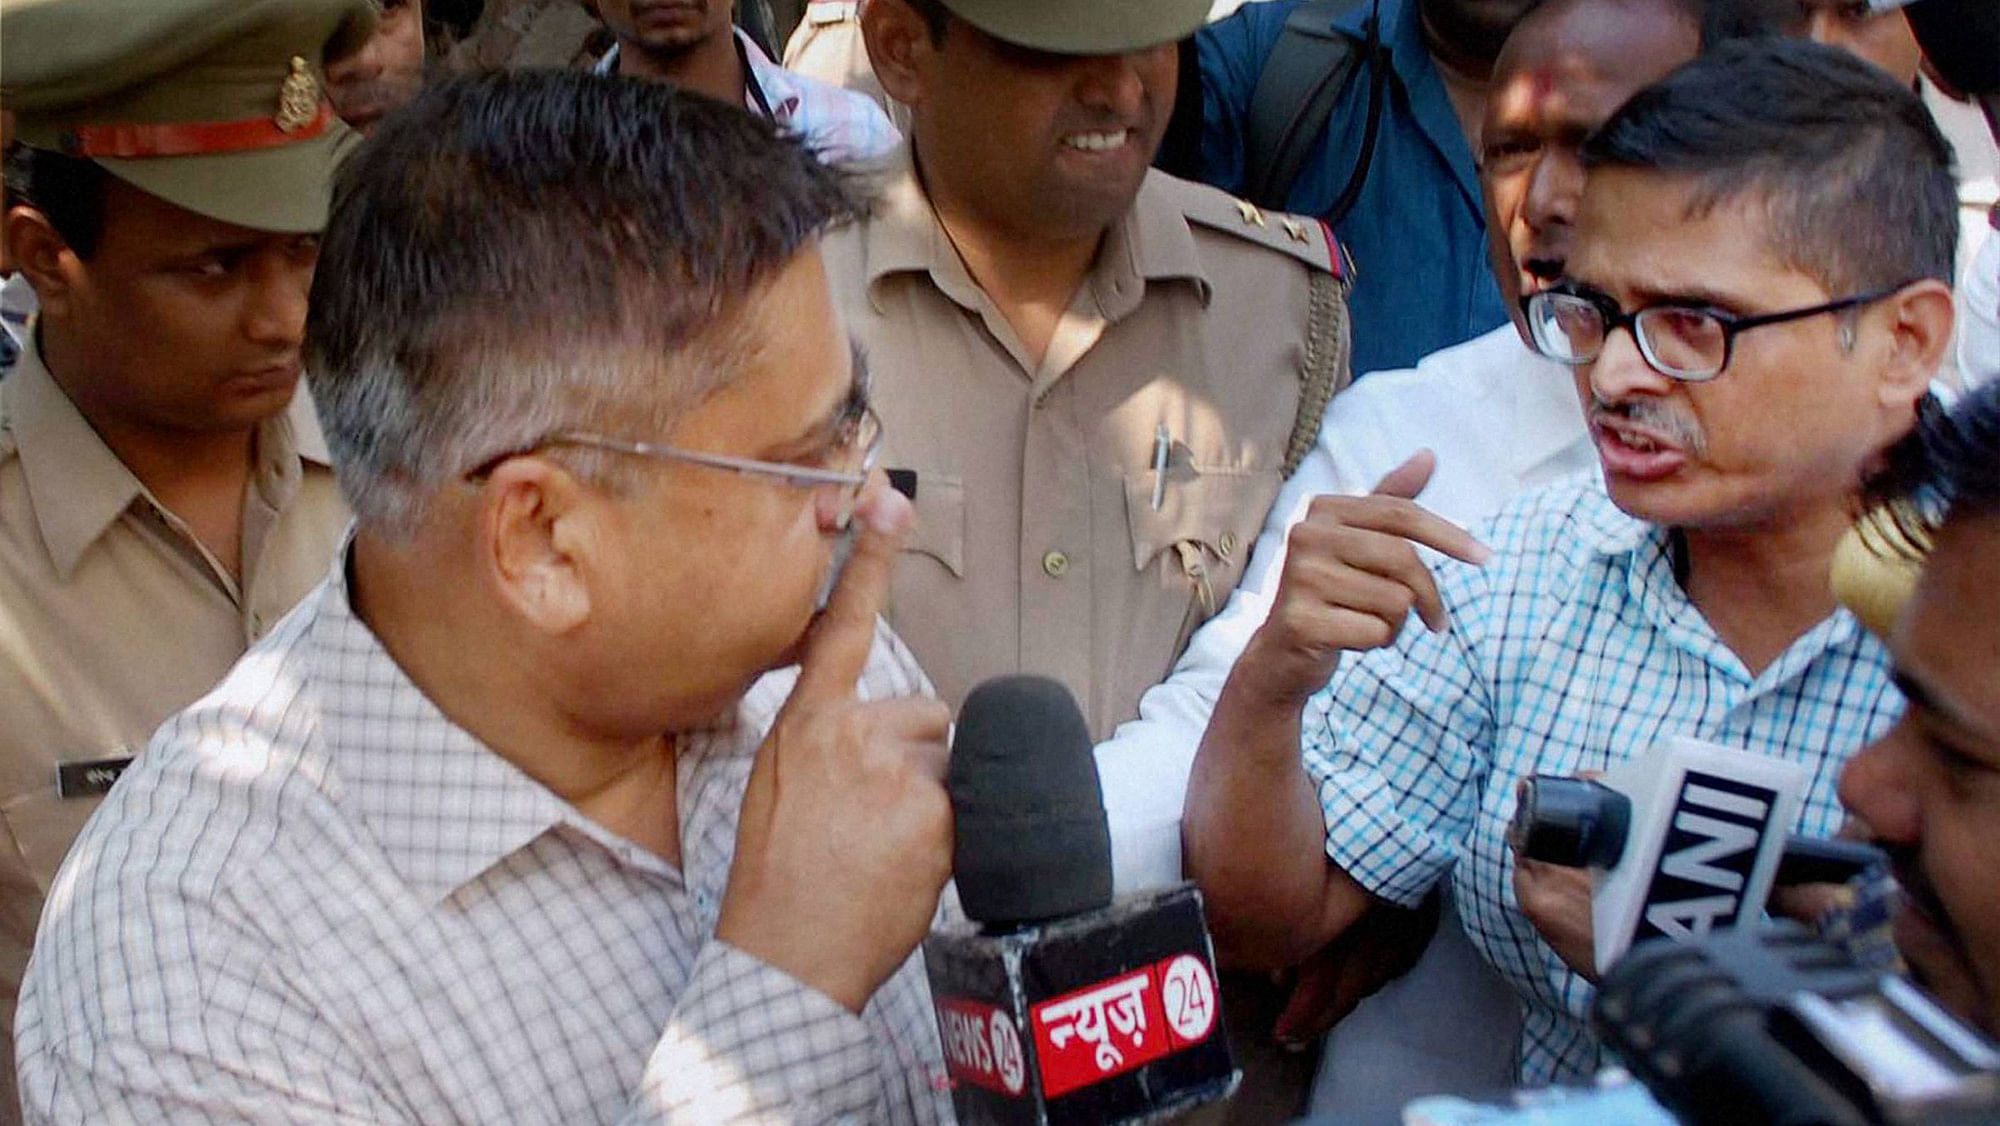 Suspended IPS officer Amitabh Thakur (right), who lodged an FIR against SP supremo Mulayam Singh Yadav argues with the vigilance team that conducted searches in his house at Gomti Nagar locality in Lucknow on Tuesday. (Photo: PTI)